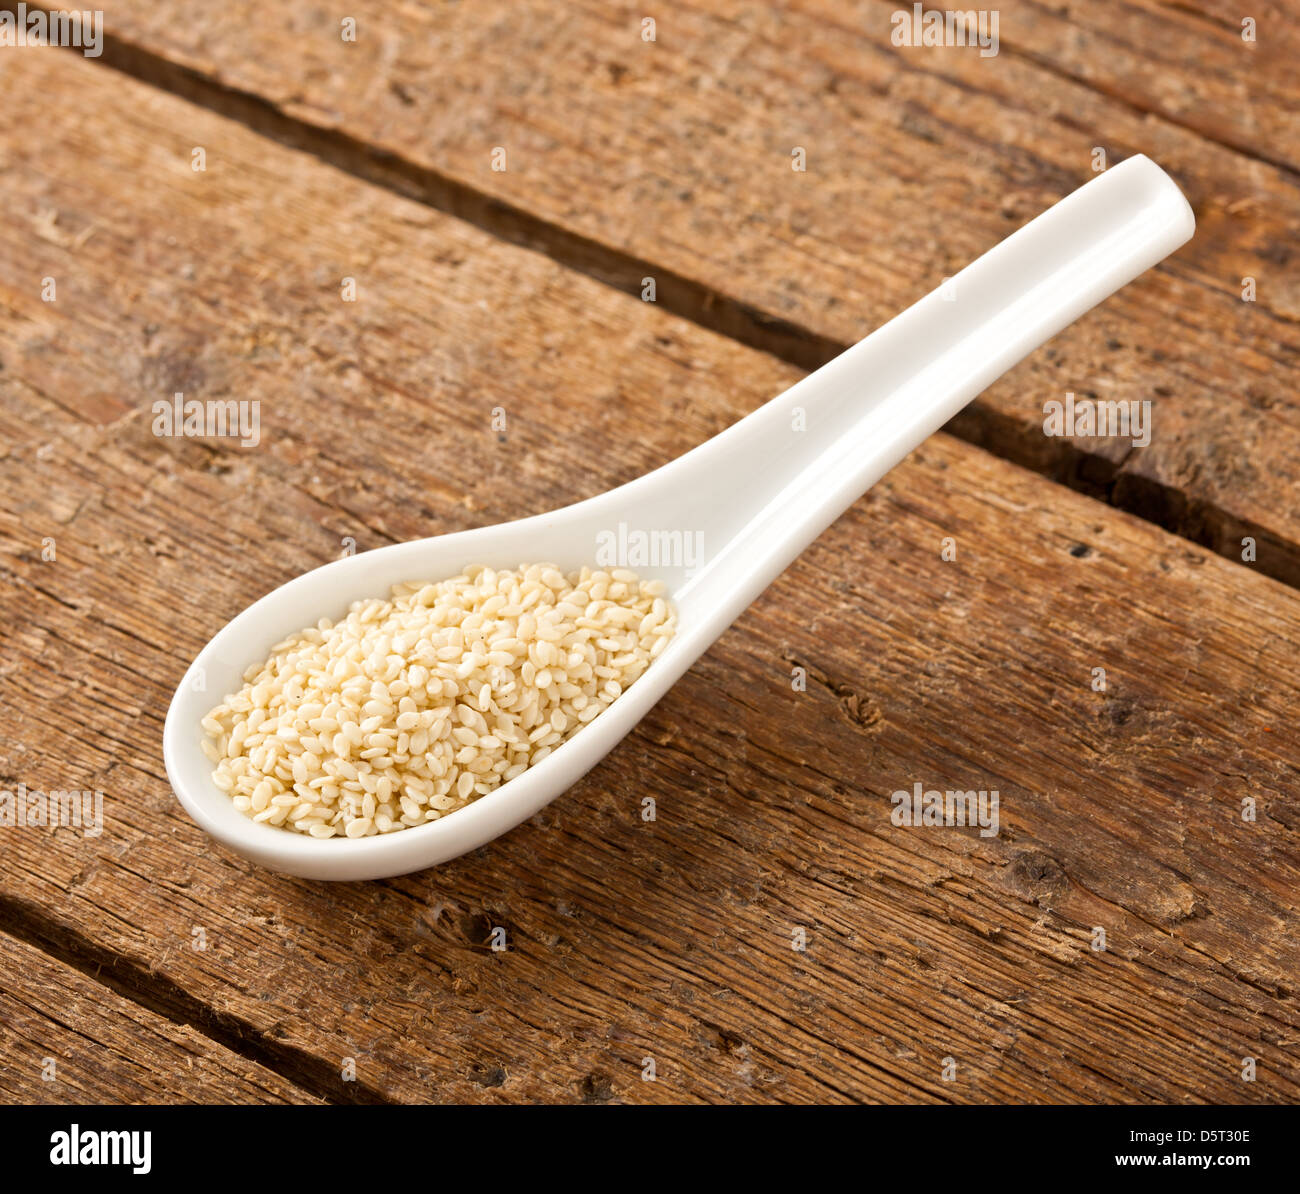 Sesame seeds in the spoon on wooden table Stock Photo